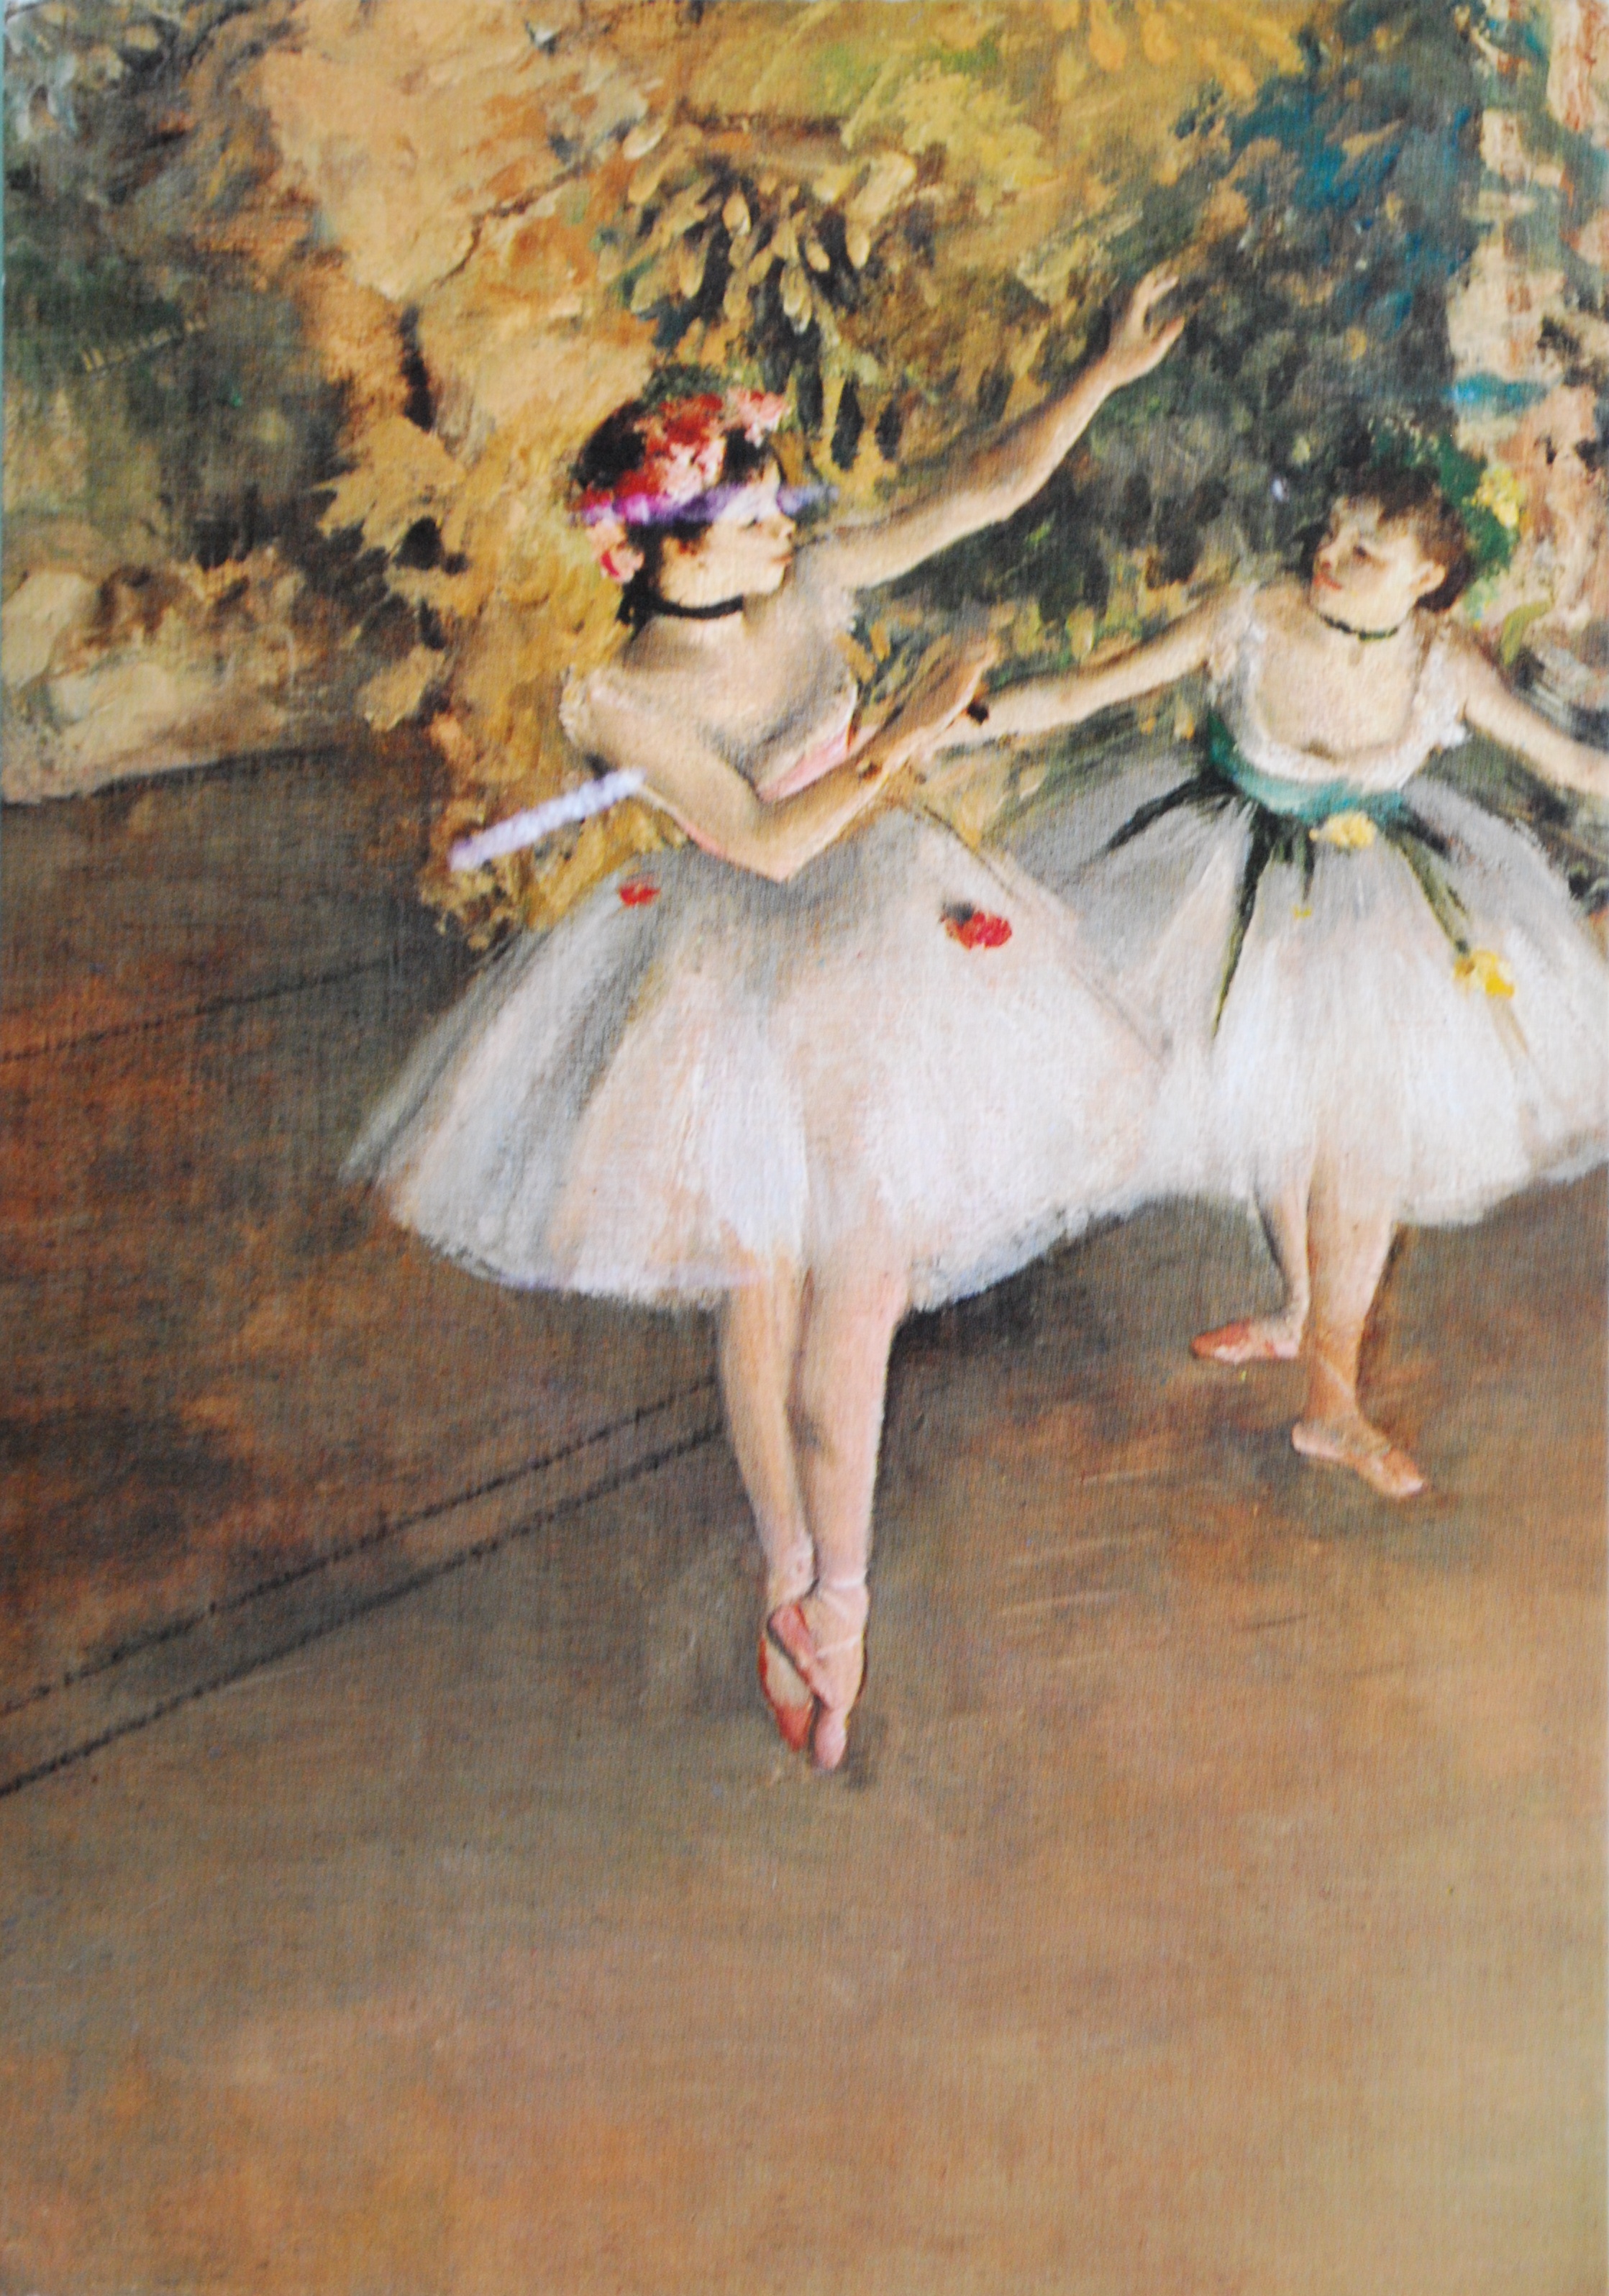 Portrait chinois des membres - Page 3 Two-dancers-on-stage-by-degas-von-ikamuur-fi